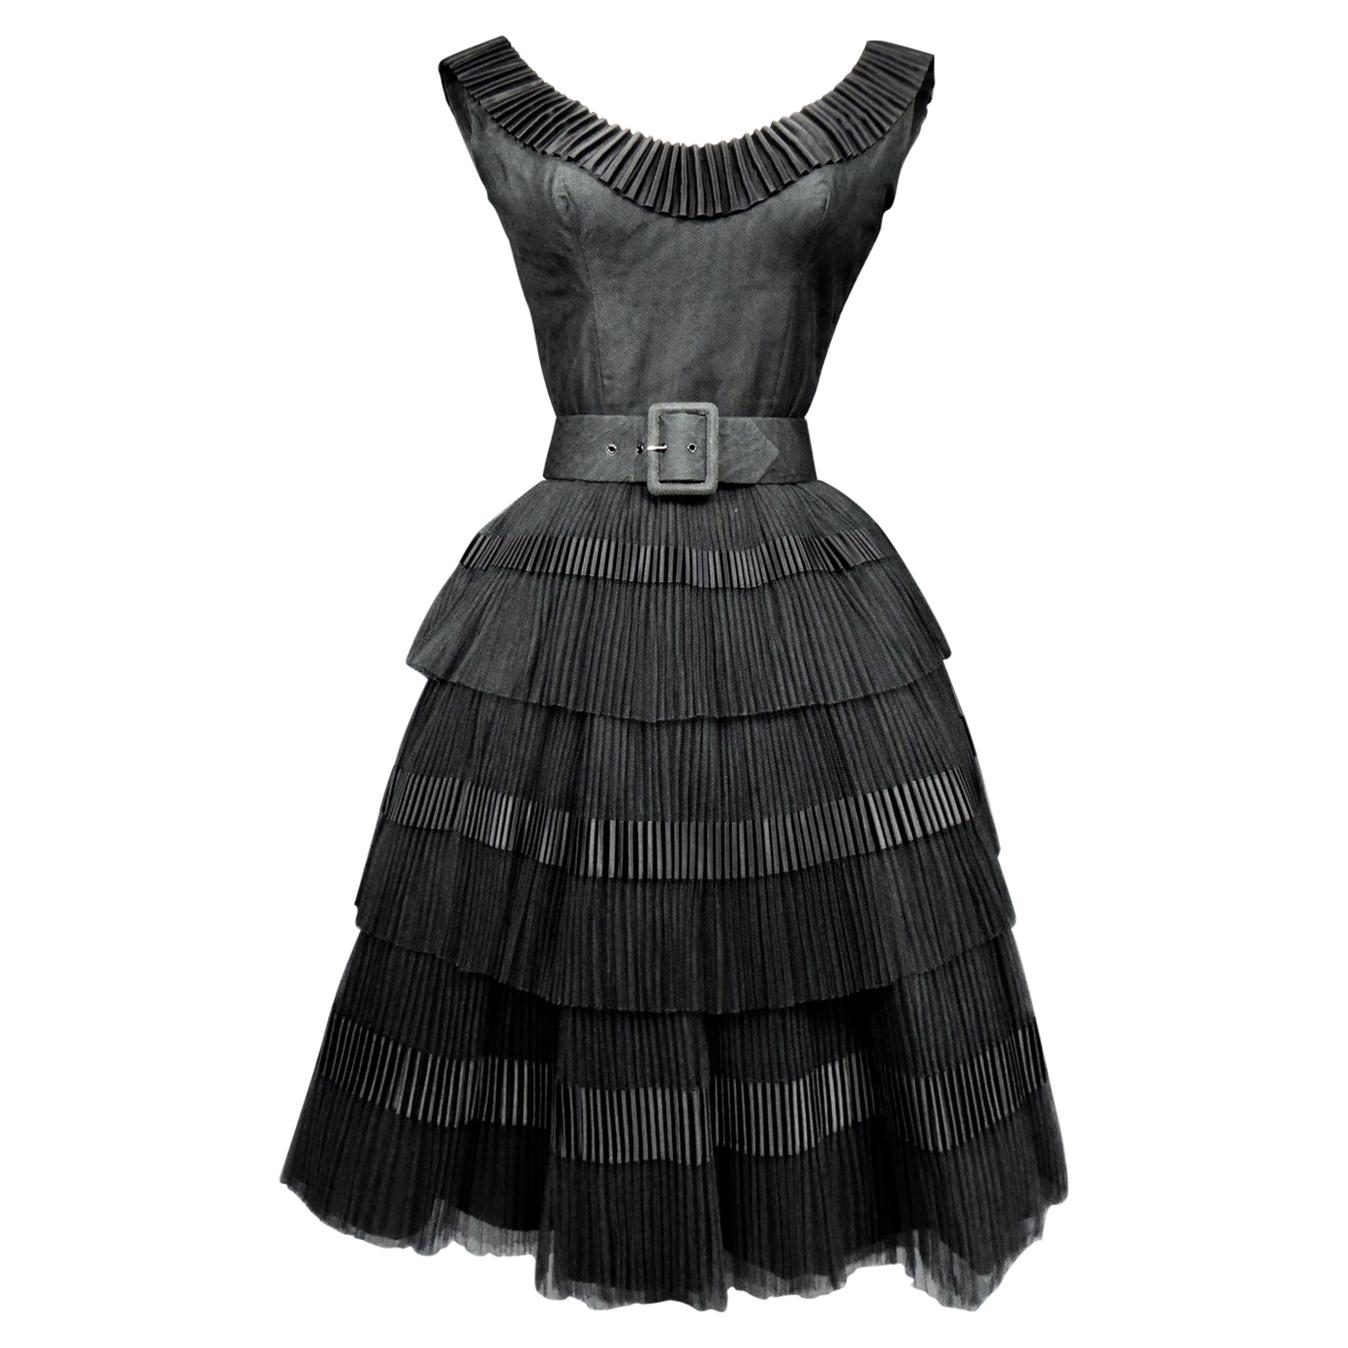 A Nina Ricci Couture Cocktail Dress in Embossed Tulle and Ribbon Circa 1958/1962